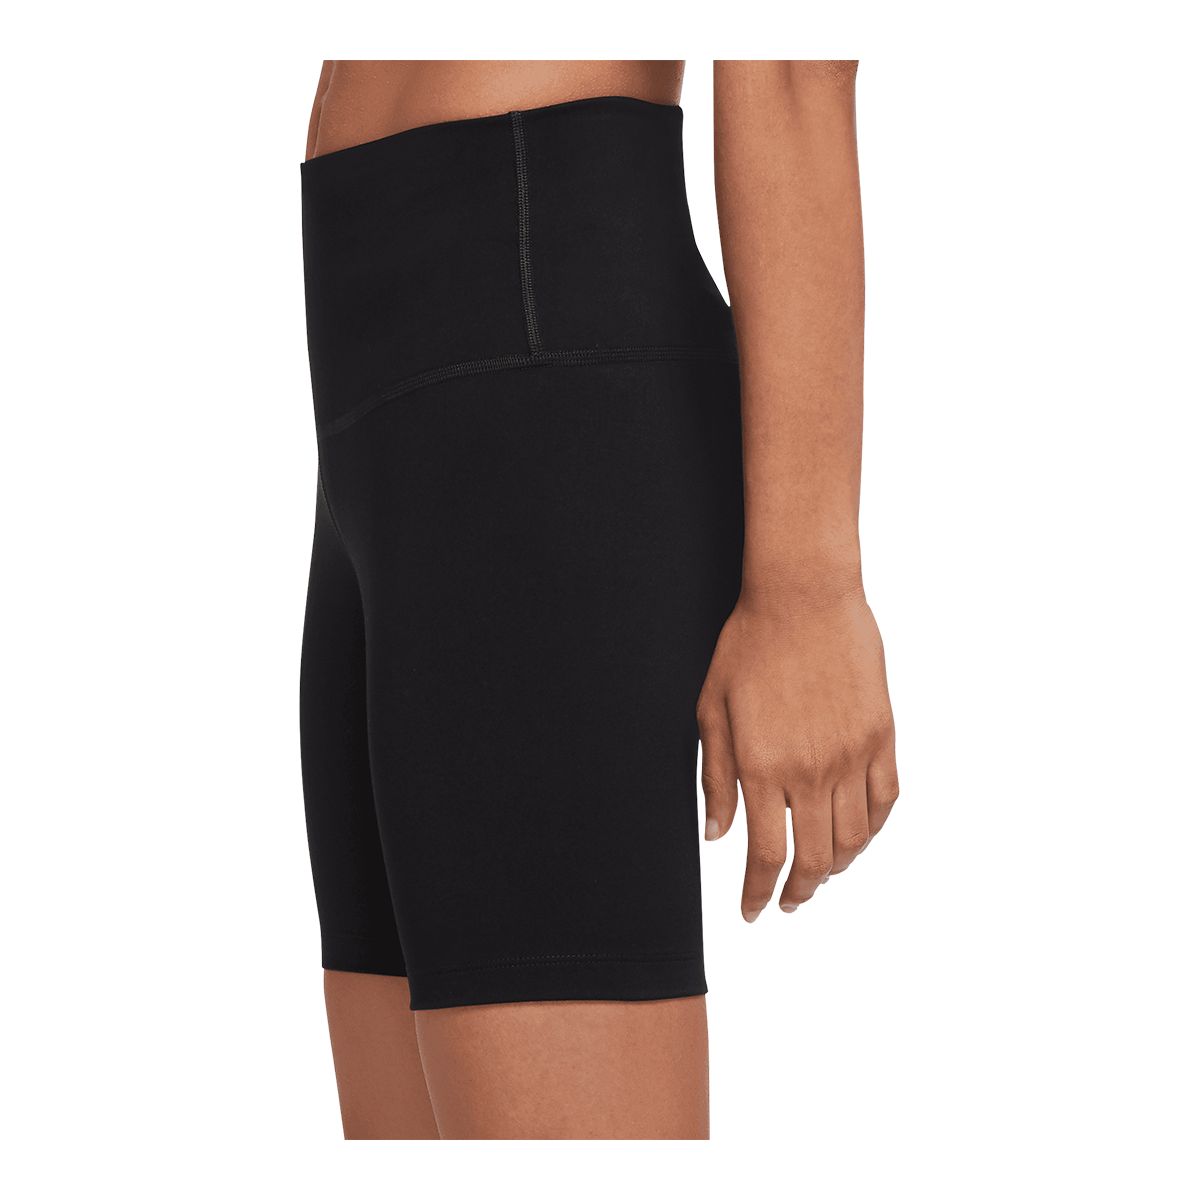 https://media-www.sportchek.ca/product/div-03-softgoods/dpt-70-athletic-clothing/sdpt-02-womens/333830527/nike-w-yoga-hr-7in-short-024058d9-5568-4e9a-a259-5fdc2aca9a7b-jpgrendition.jpg?imdensity=1&imwidth=1244&impolicy=mZoom